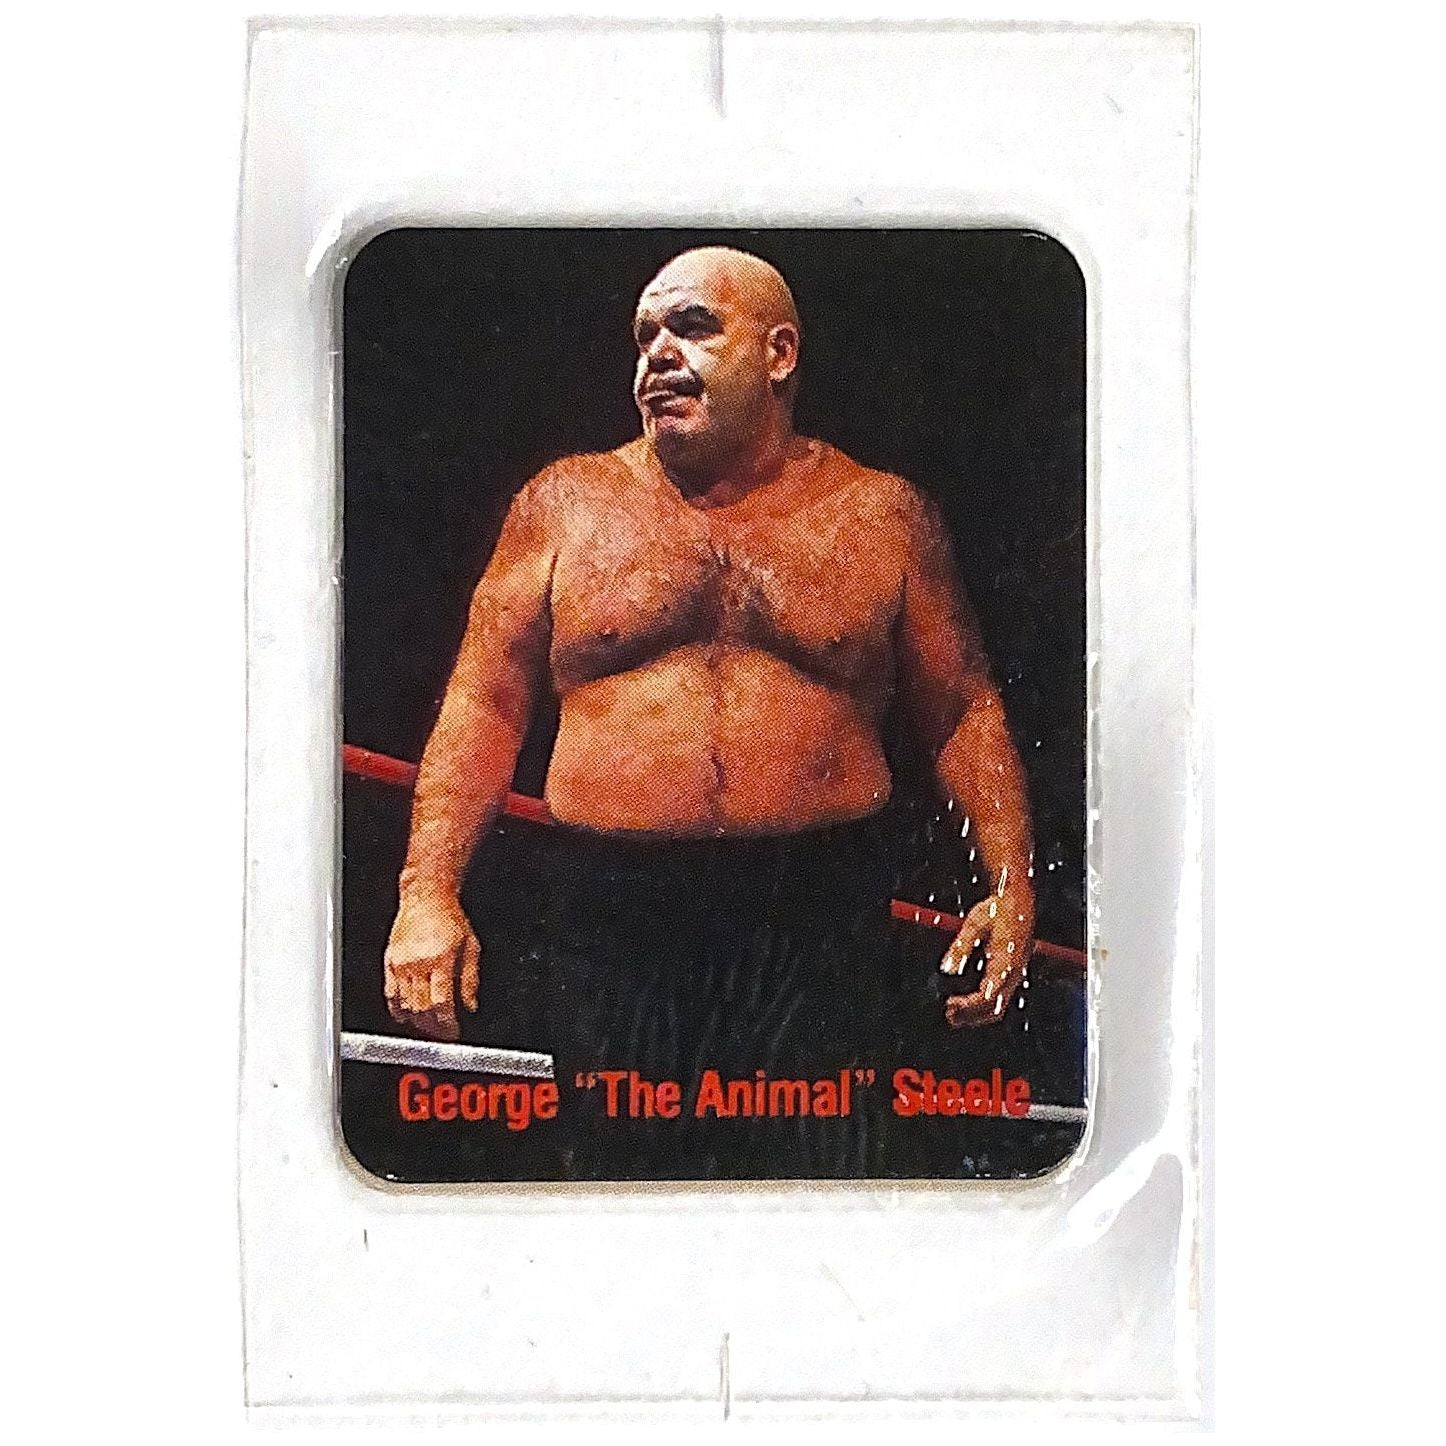  1988 Borden Titan Sports WWF The Tag Team of the Year George “The Animal” Steele  Local Legends Cards & Collectibles